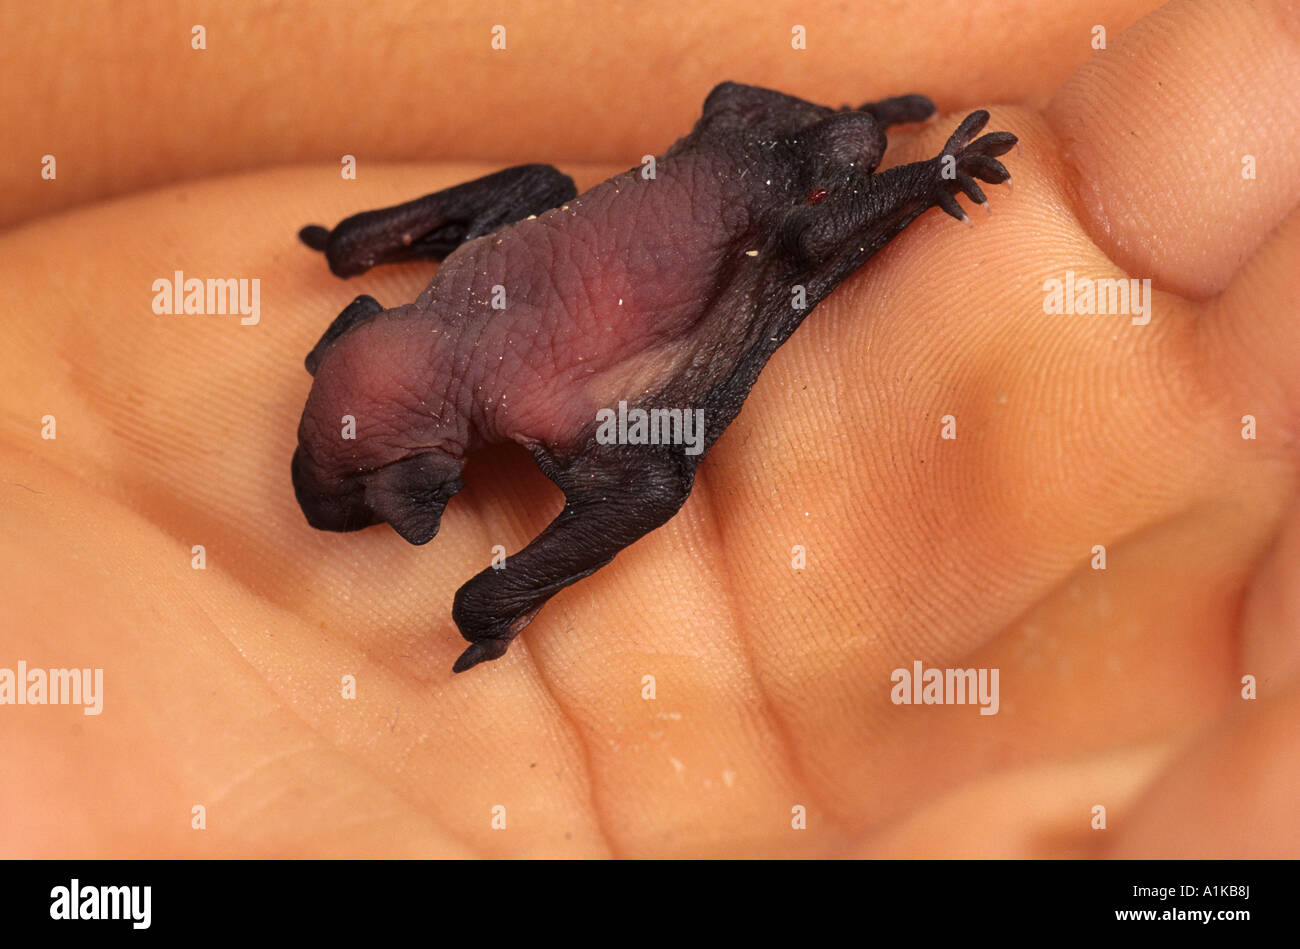 Common pipistrell (Pipistrellus pipistrellus) 3 day old young Stock Photo